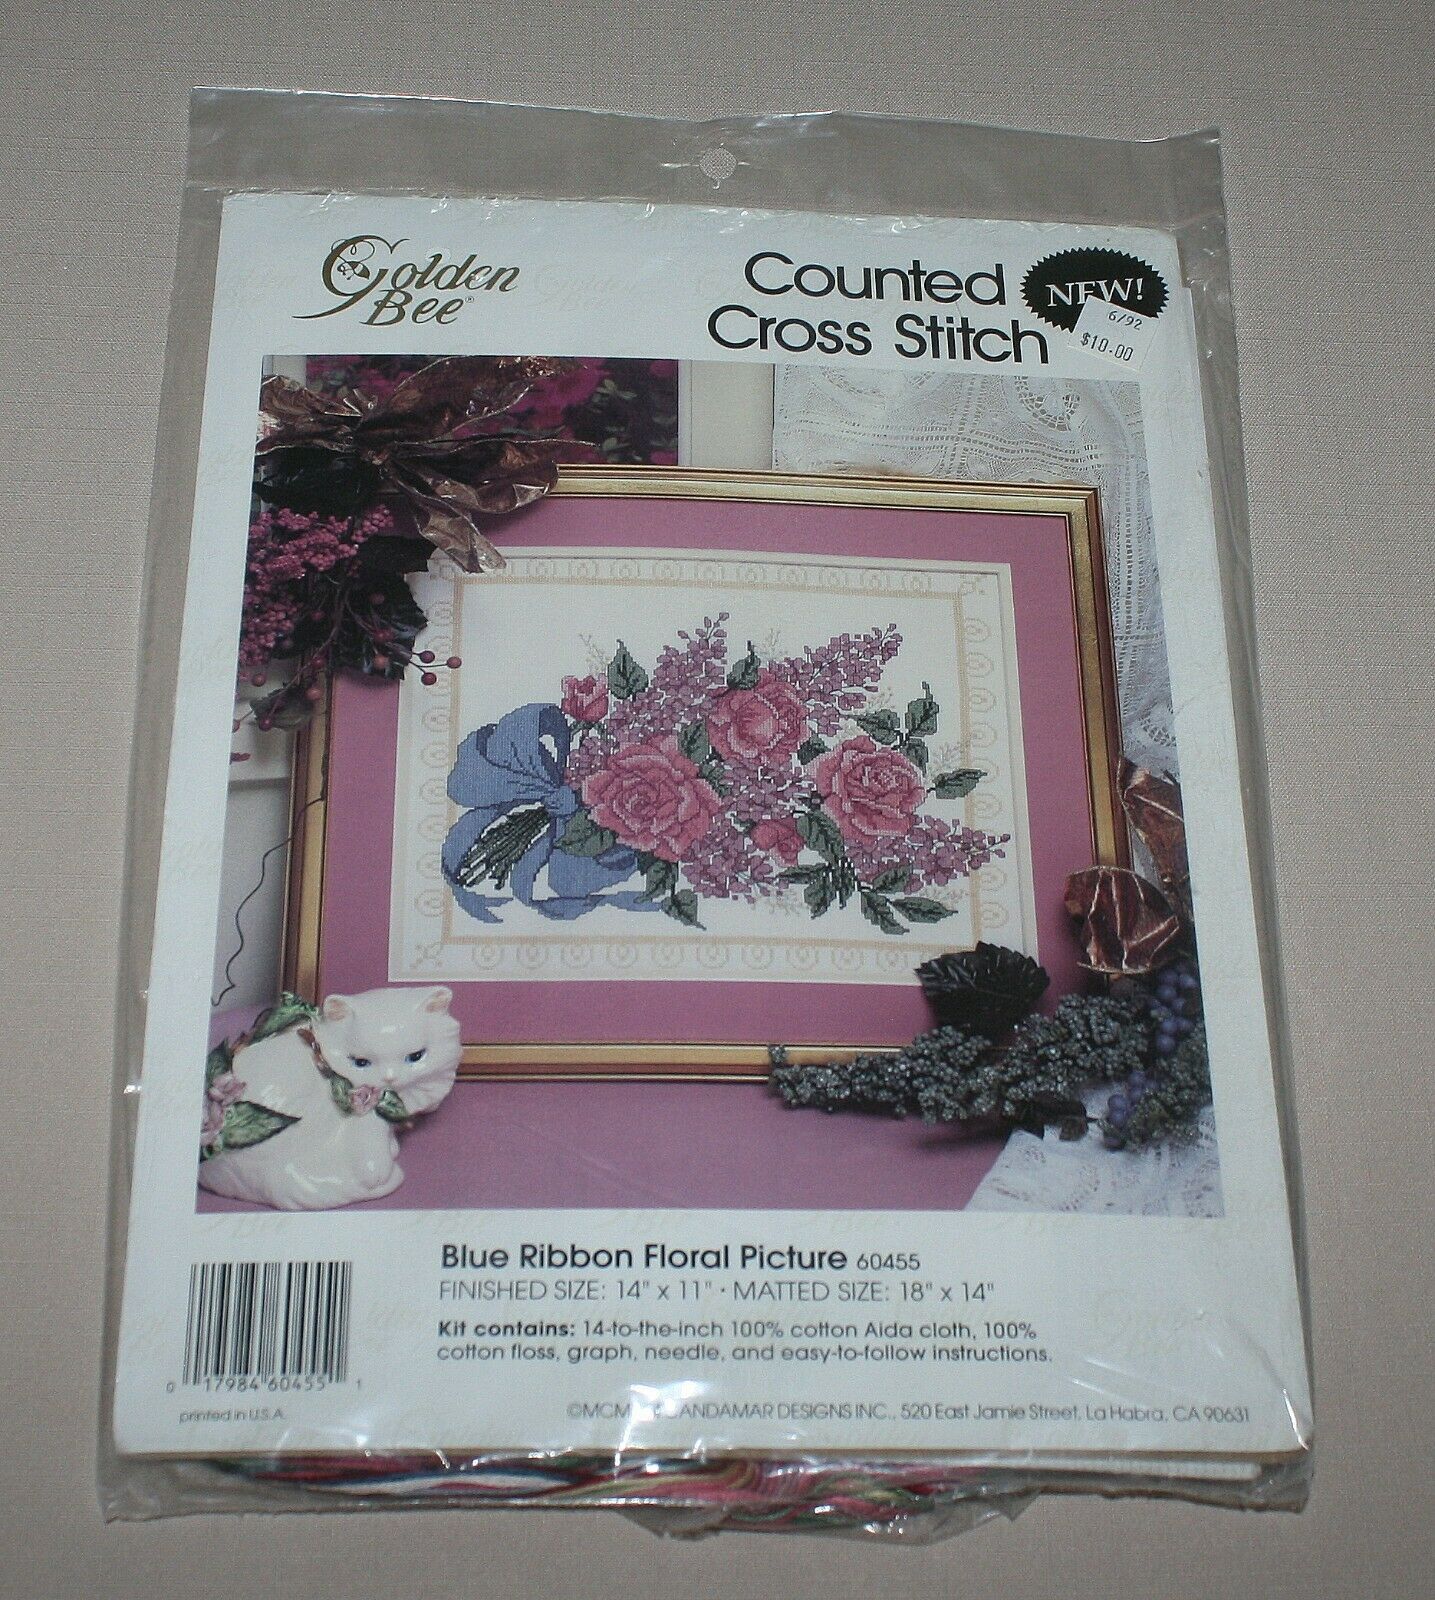 Primary image for Golden Bee Blue Ribbon Floral Picture Counted Cross Stitch Kit Pink Flower 60455